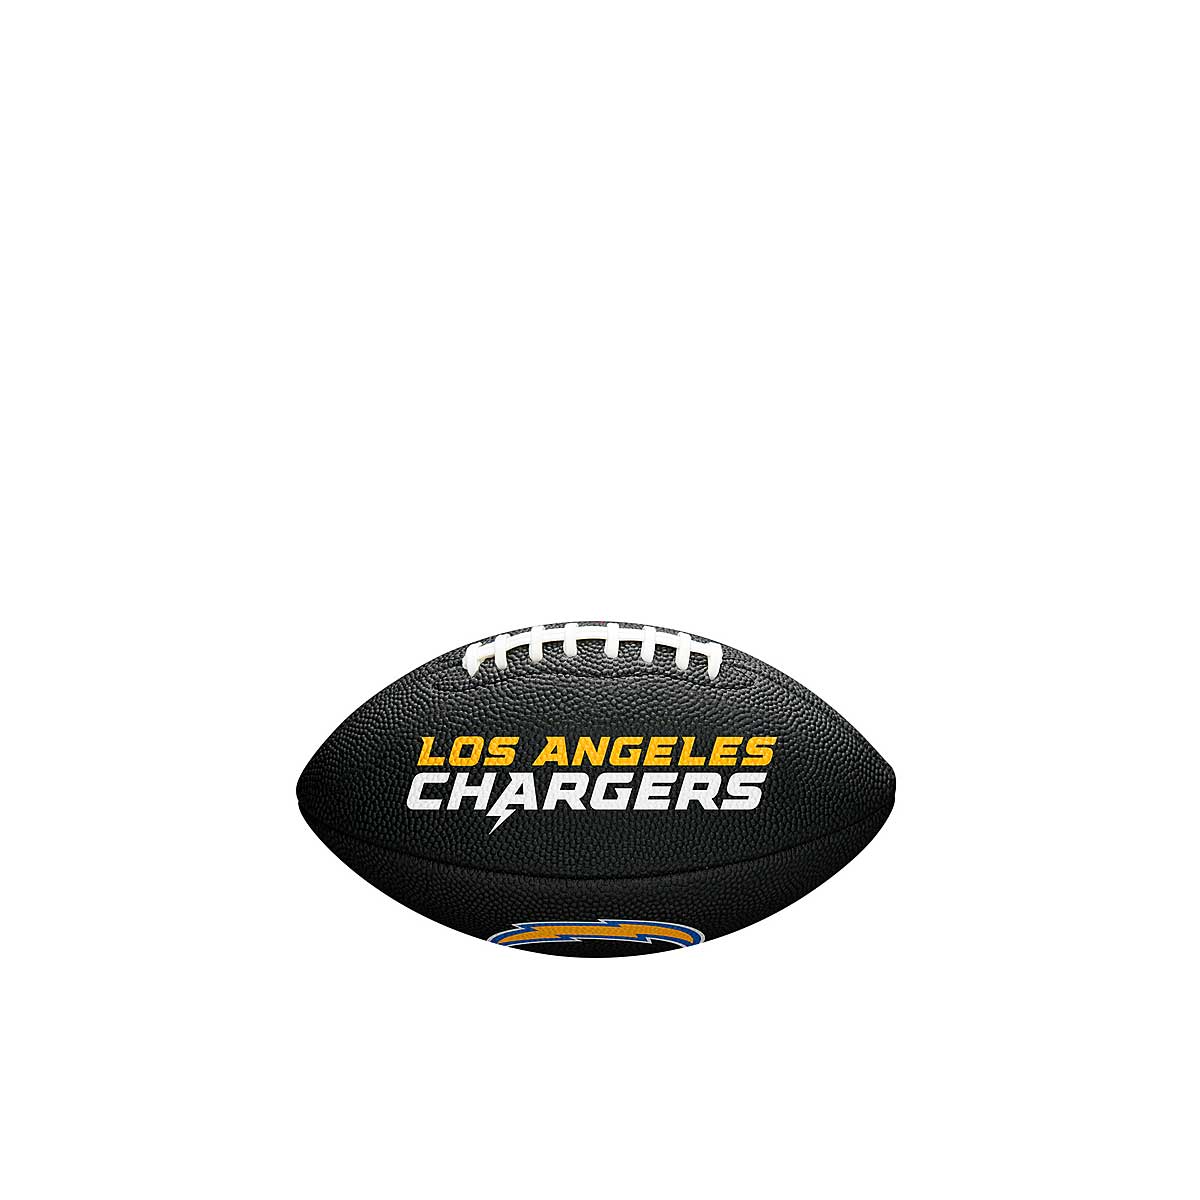 Wilson Nfl Team Soft Touch Football Los Angeles Chargers, Black/